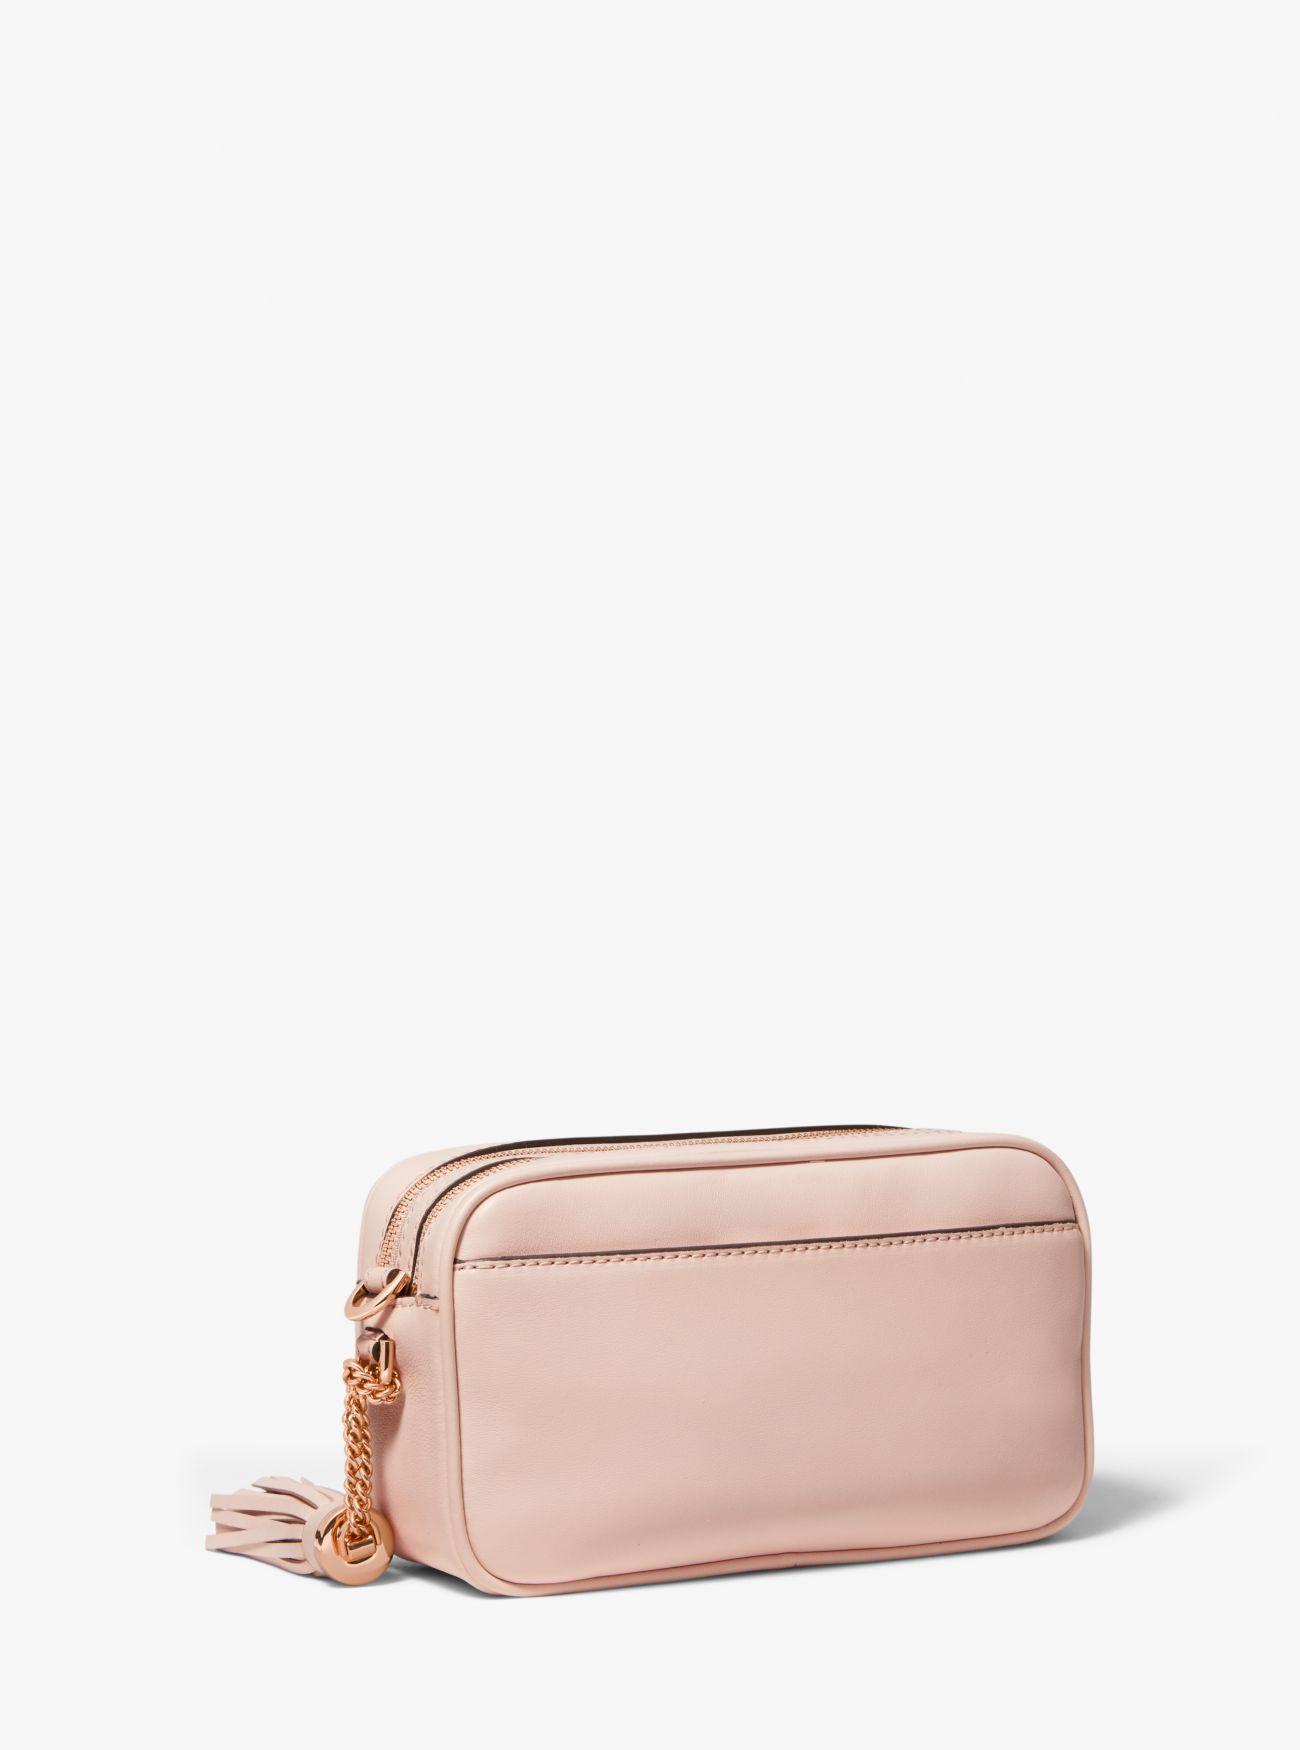 Michael Kors Small Rose Studded Leather Camera Bag in Soft Pink (Pink) - Lyst